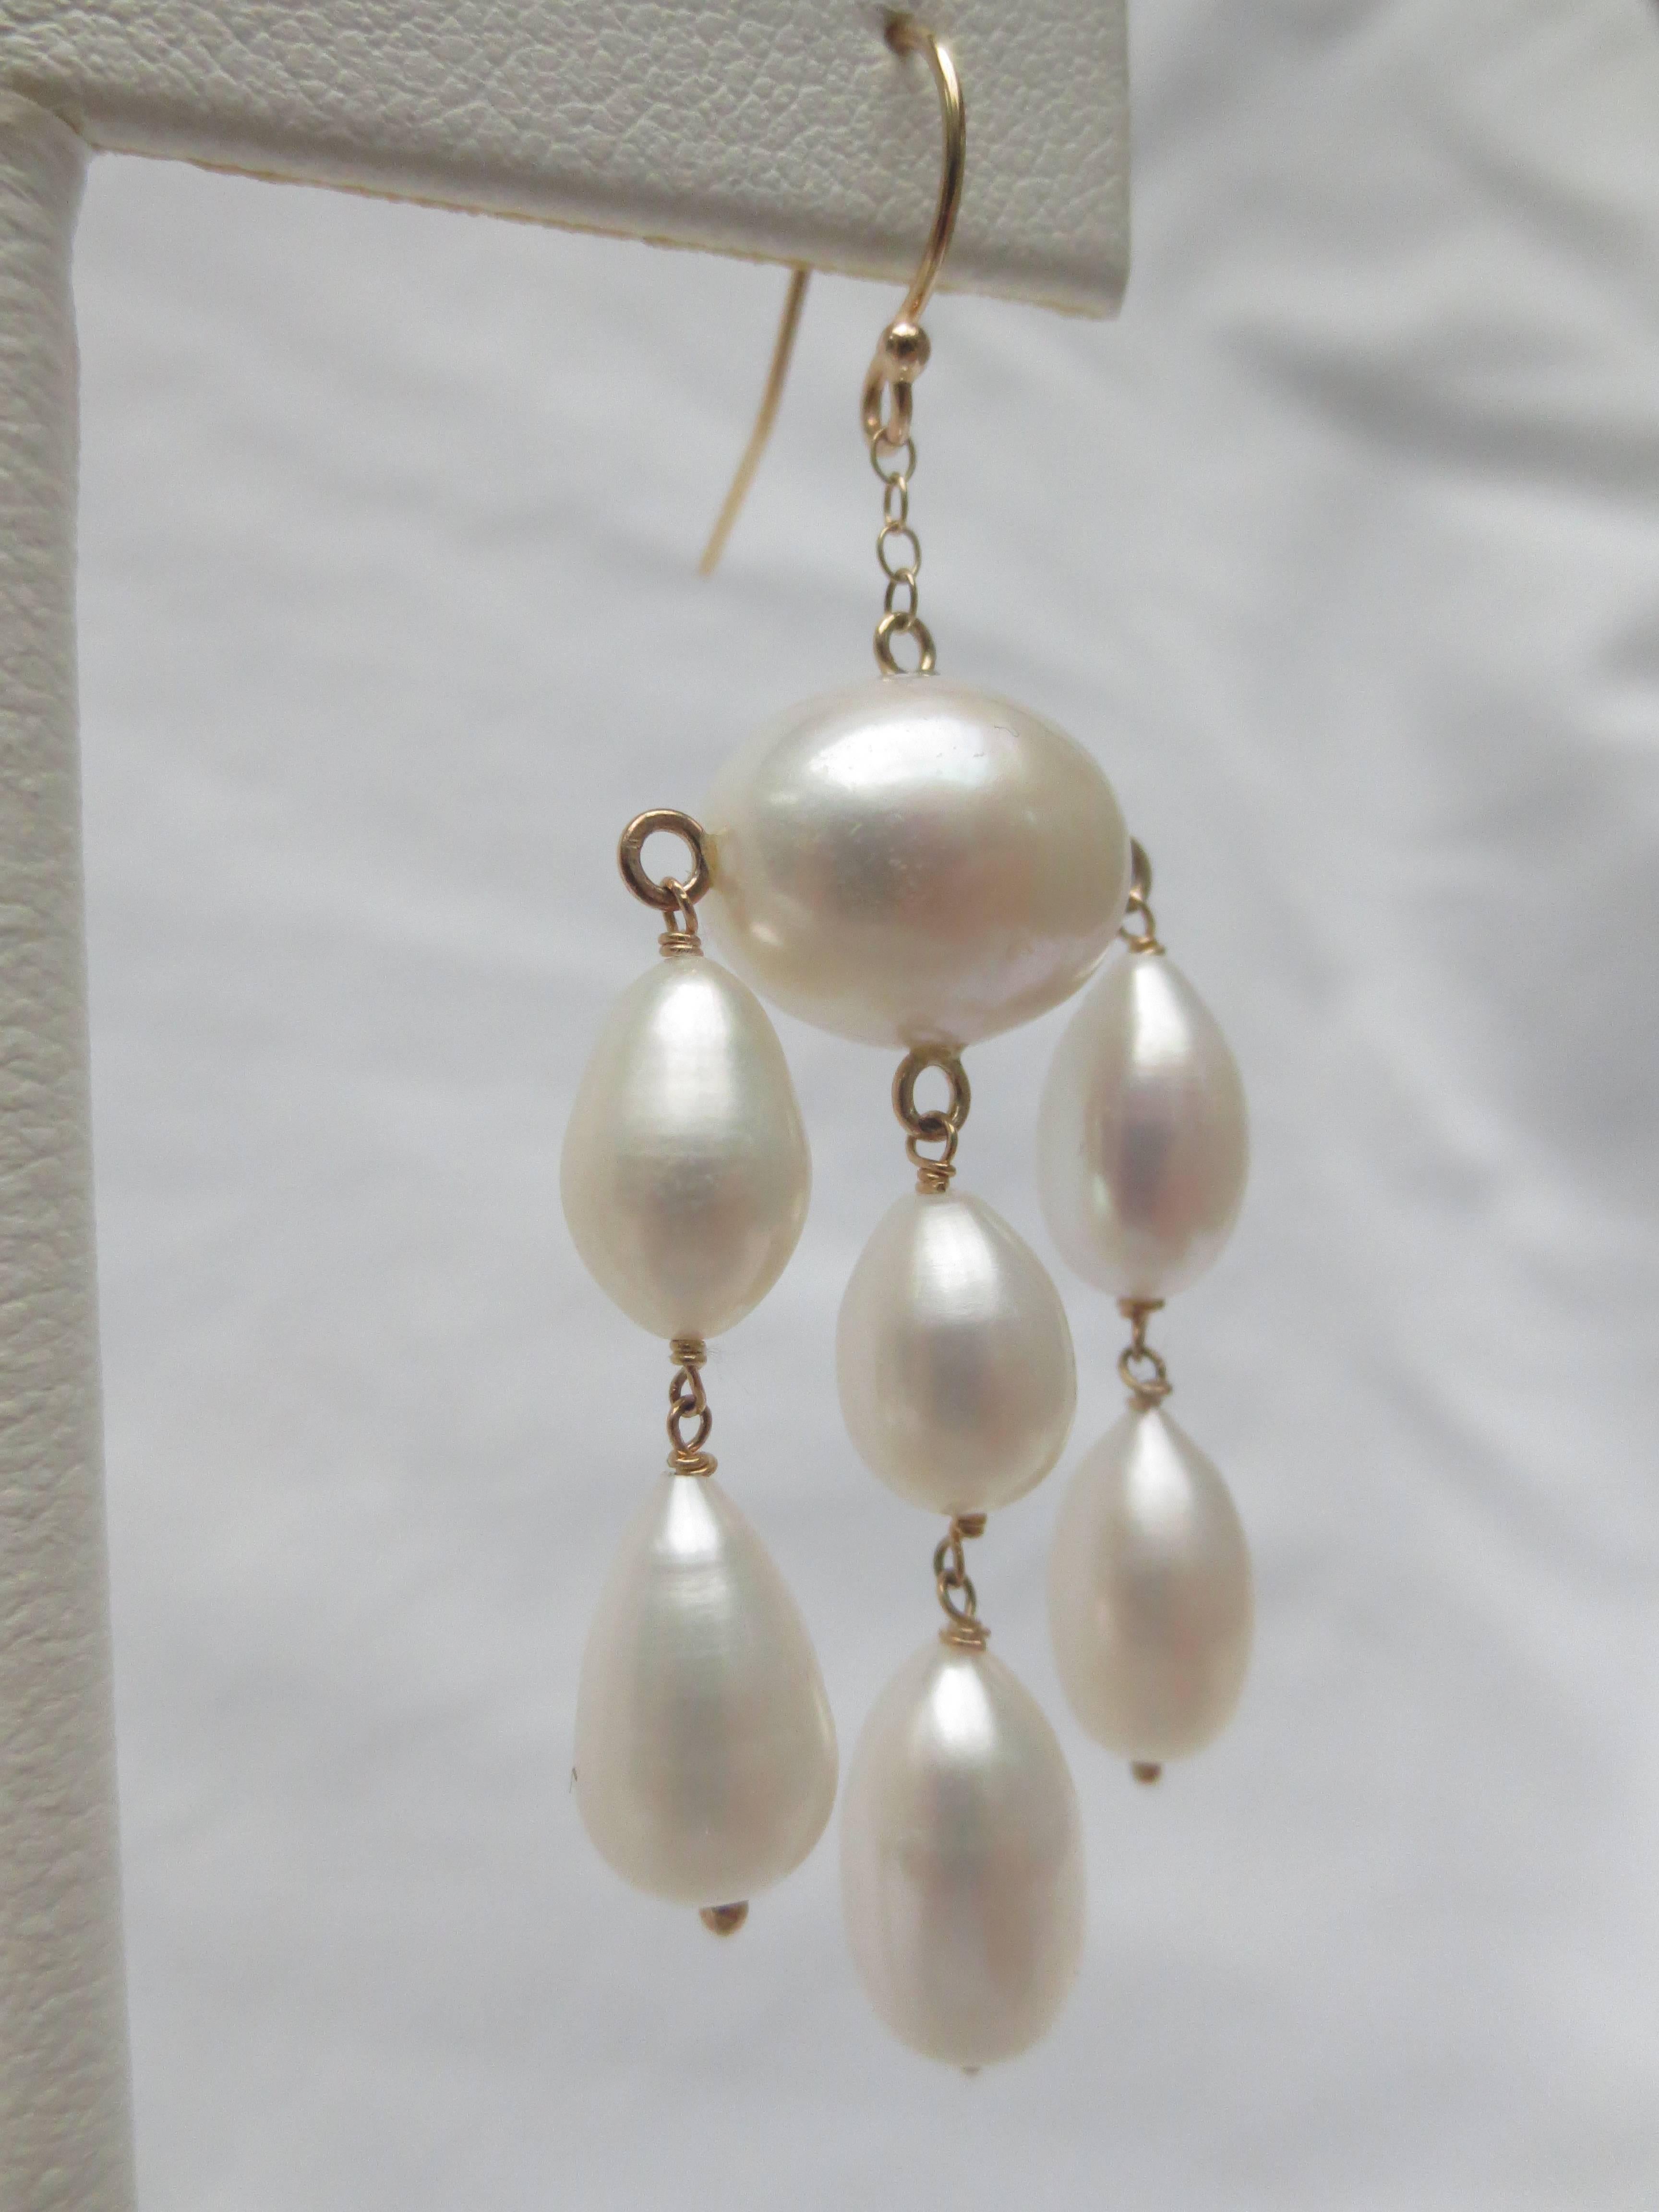 Artist Marina J Oval and Teardrop Baroque Pearl Dangle Earrings with 14 K Gold Wire